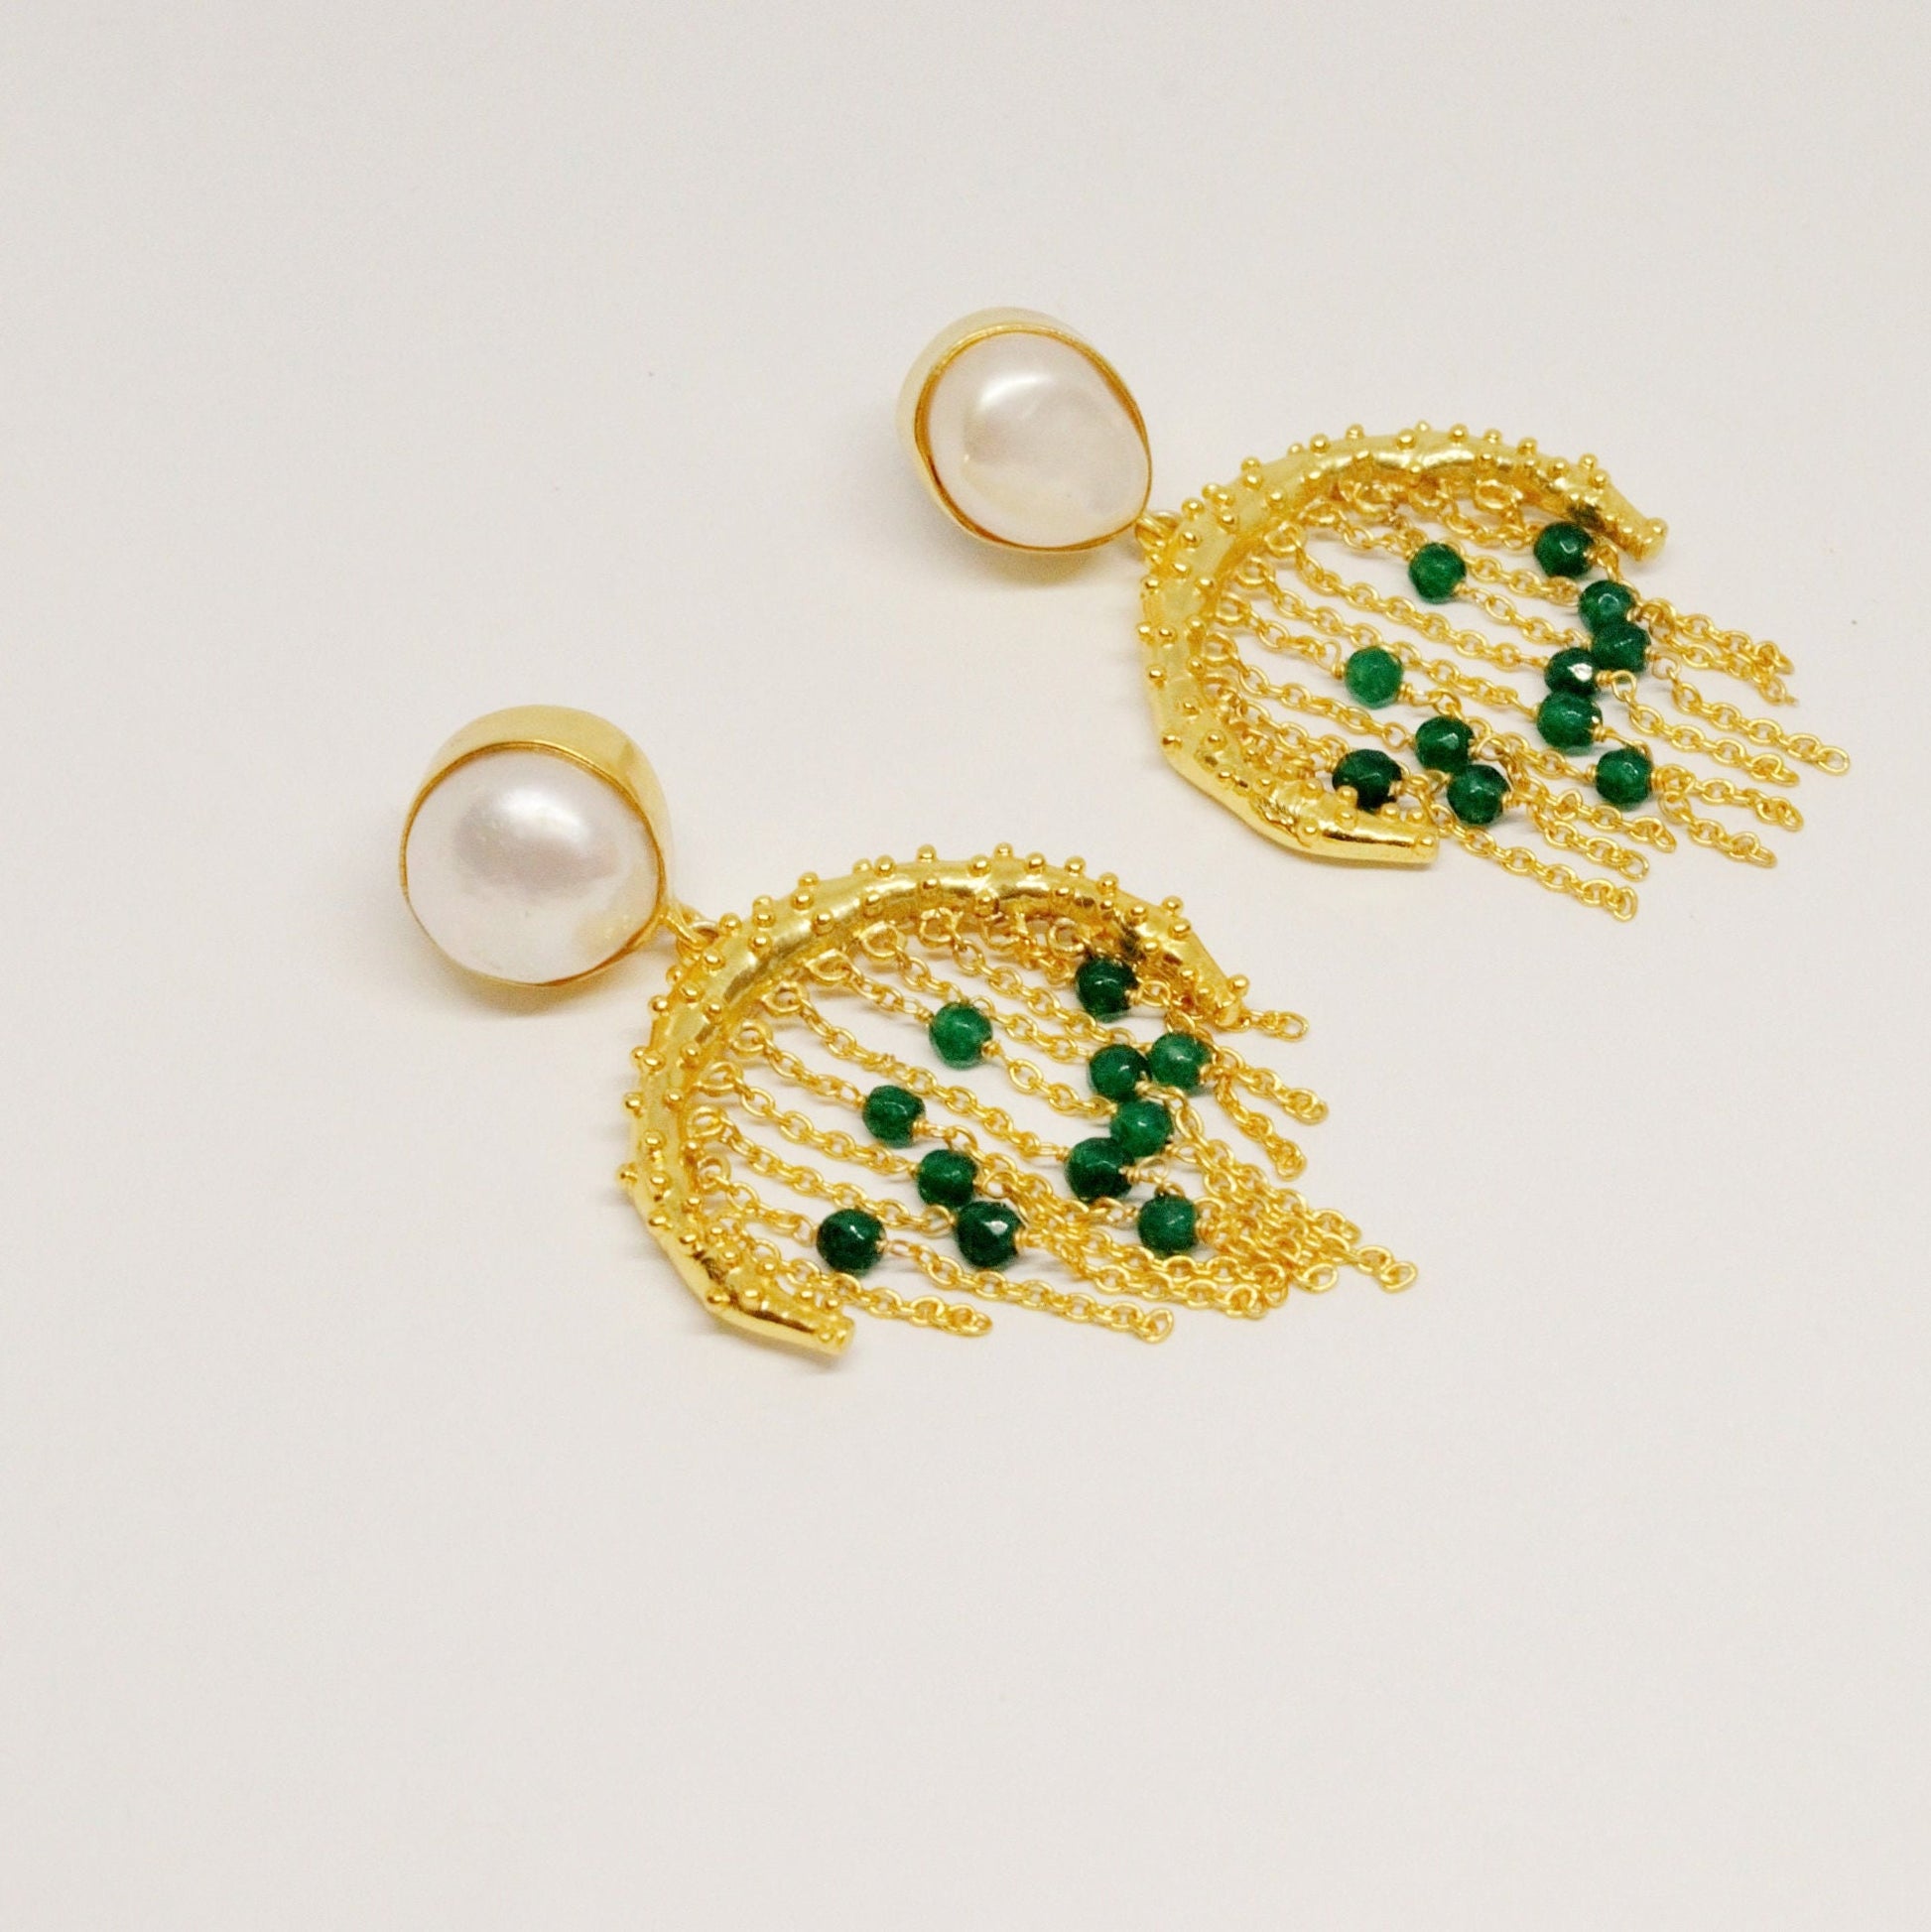 Green Onyx, Pearl Gold Drop Earrings, June Birthstone Jewelry, Statement Unique Earrings, Jhumka Earrings, Gifts For Her, Birthday Gift